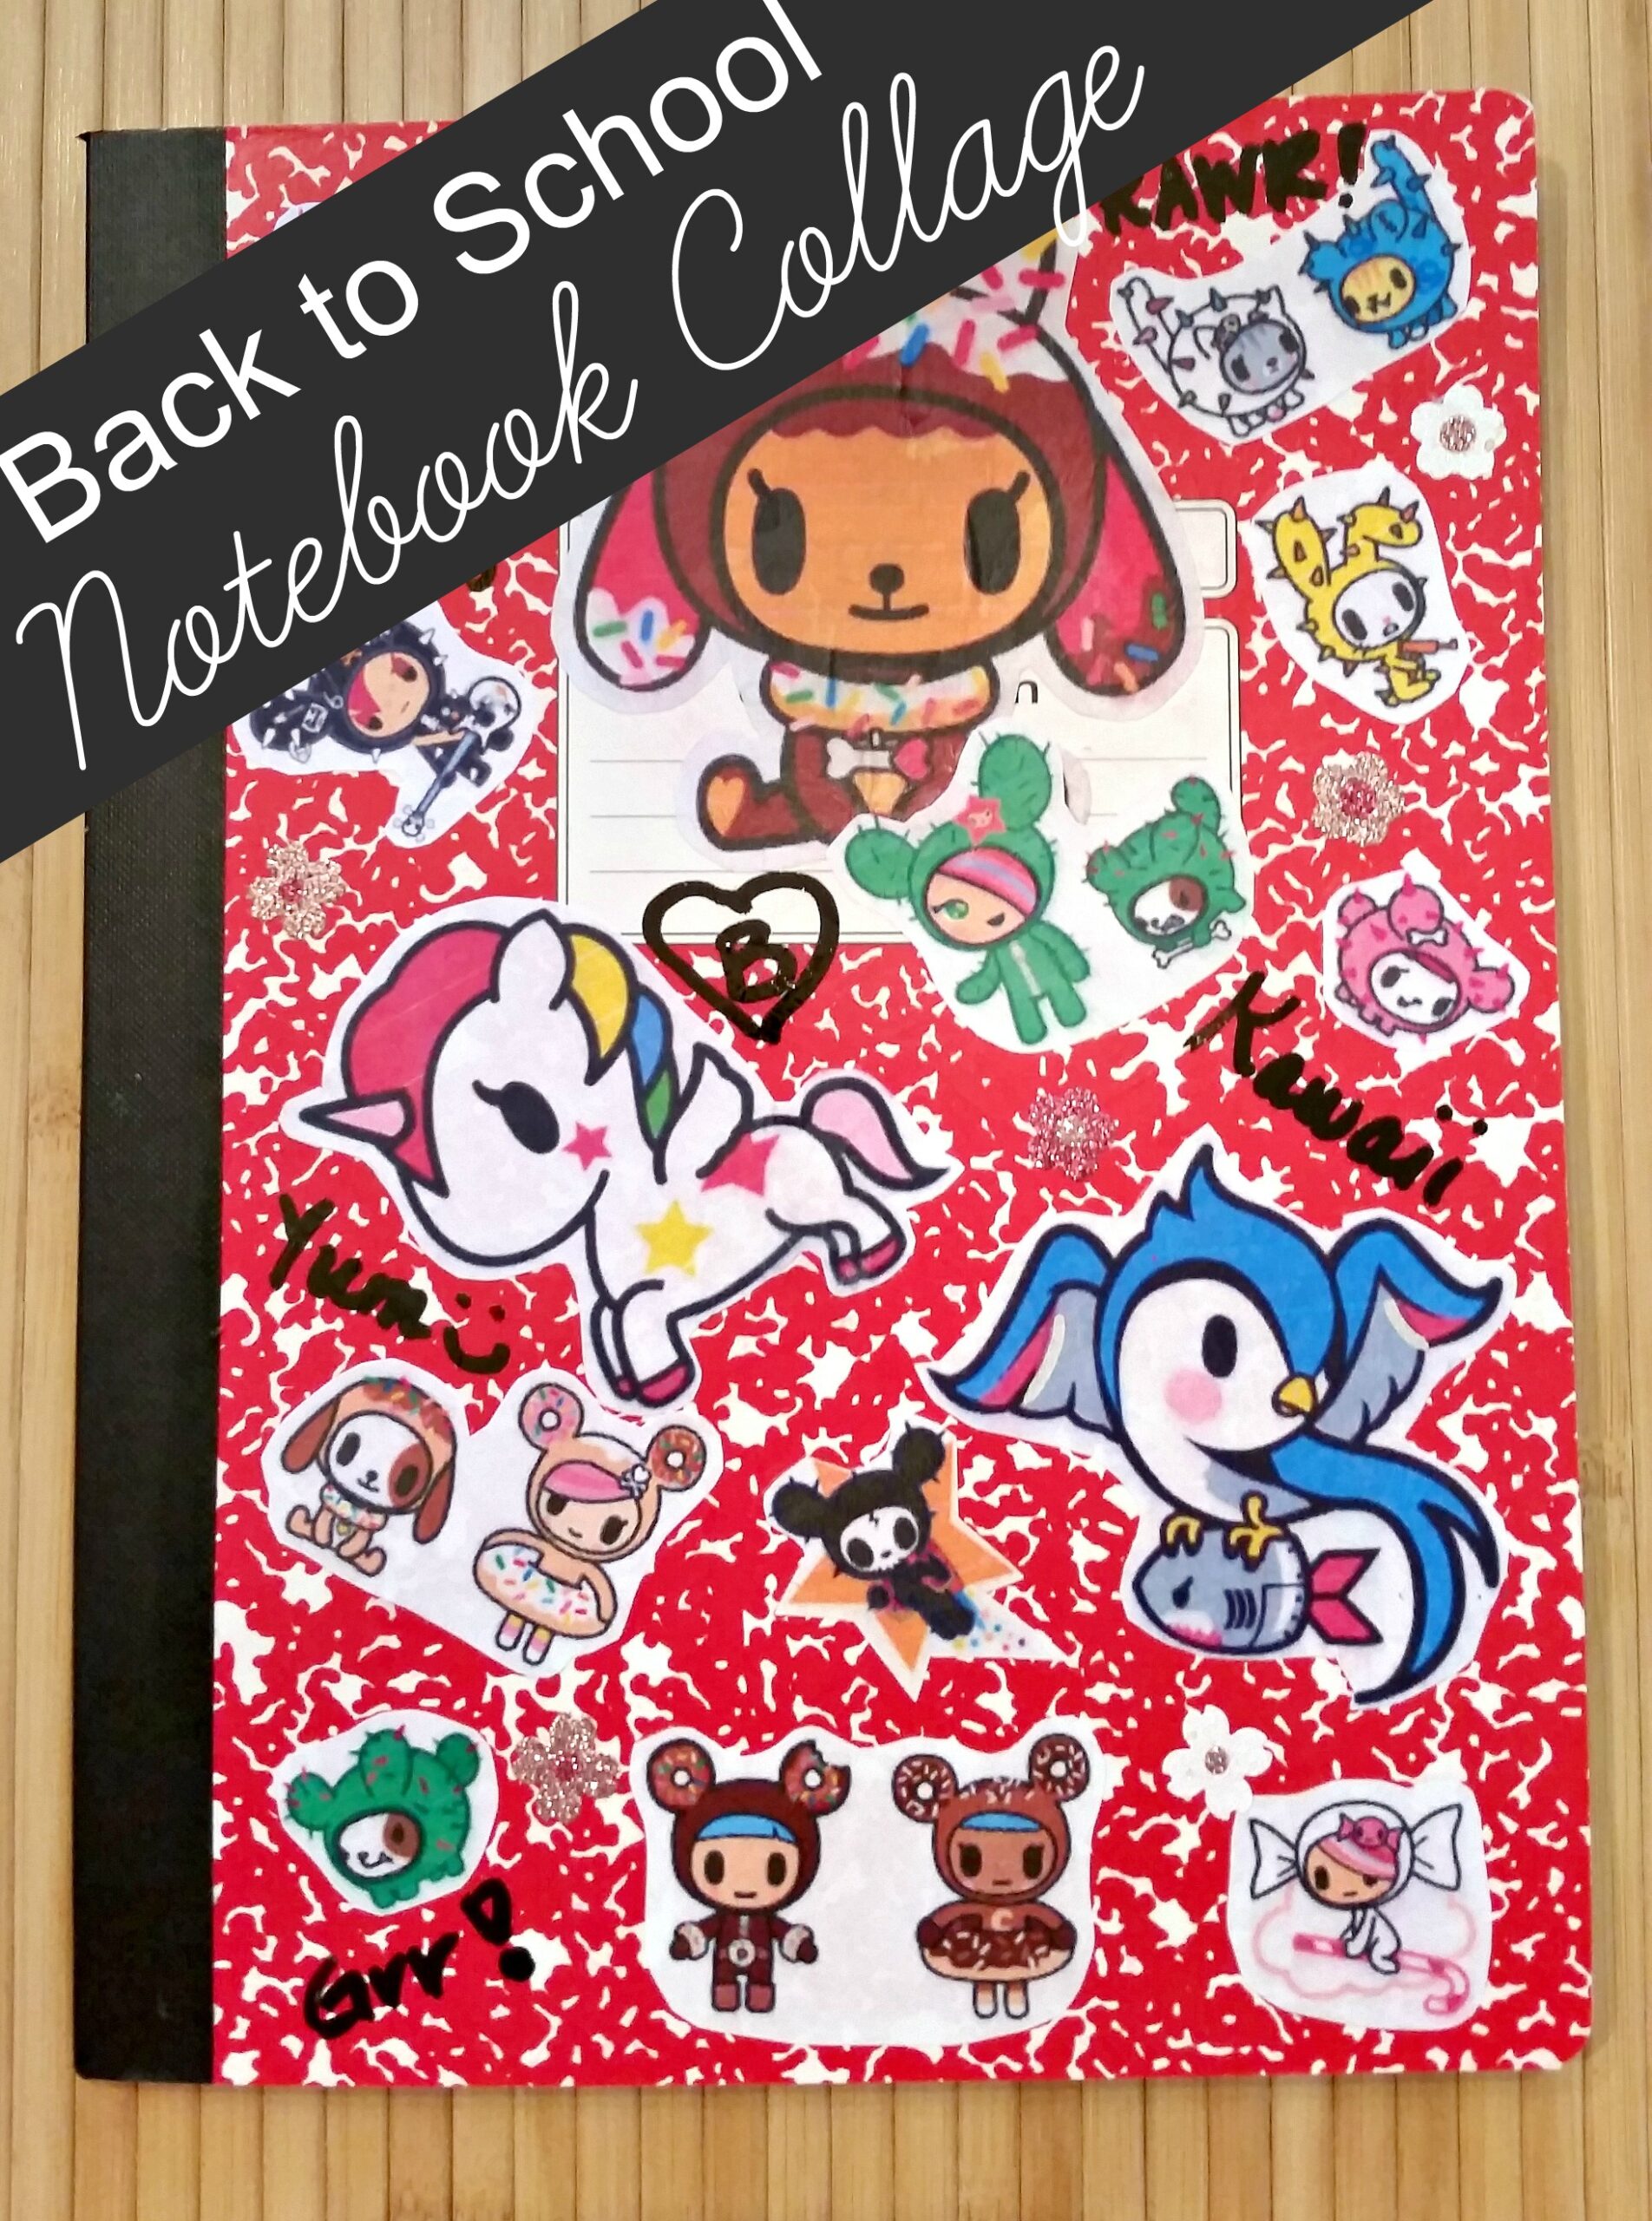 Back to School Notebook Collage